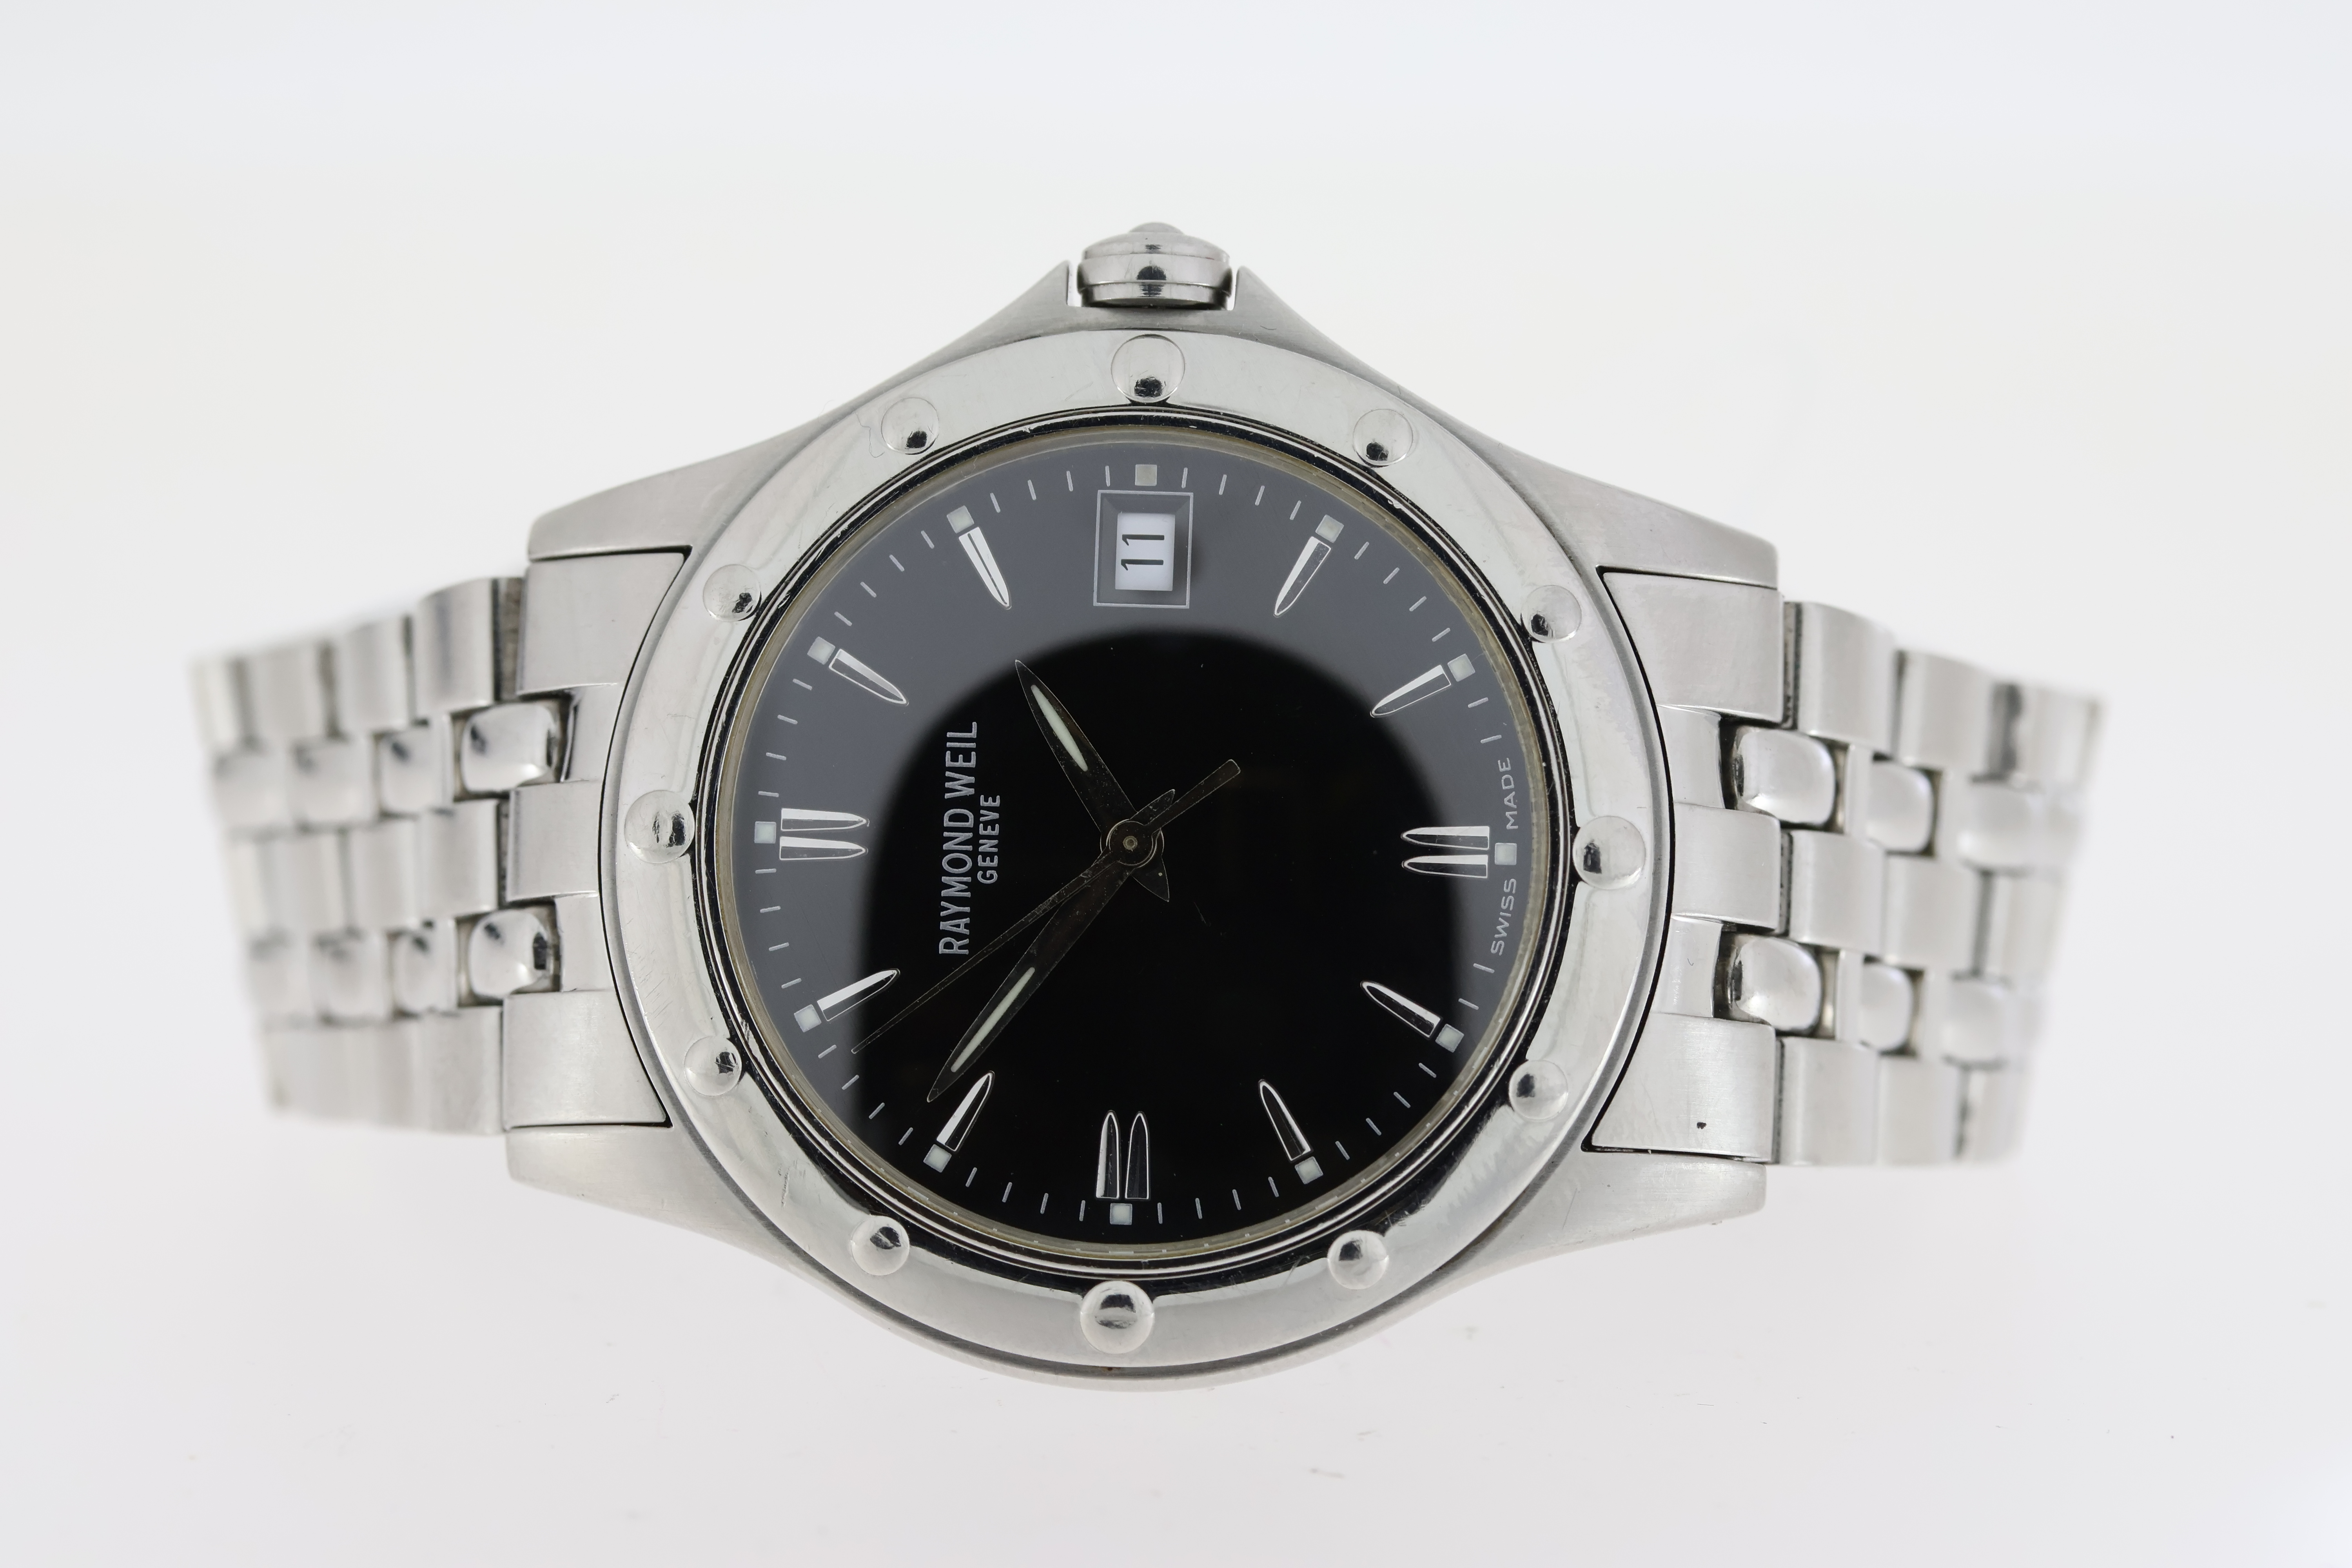 RAYMOND WEIL TANGO QUARTZ WATCH REFERENCE 5590, Approx 38mm stainless steel case with a snap on case